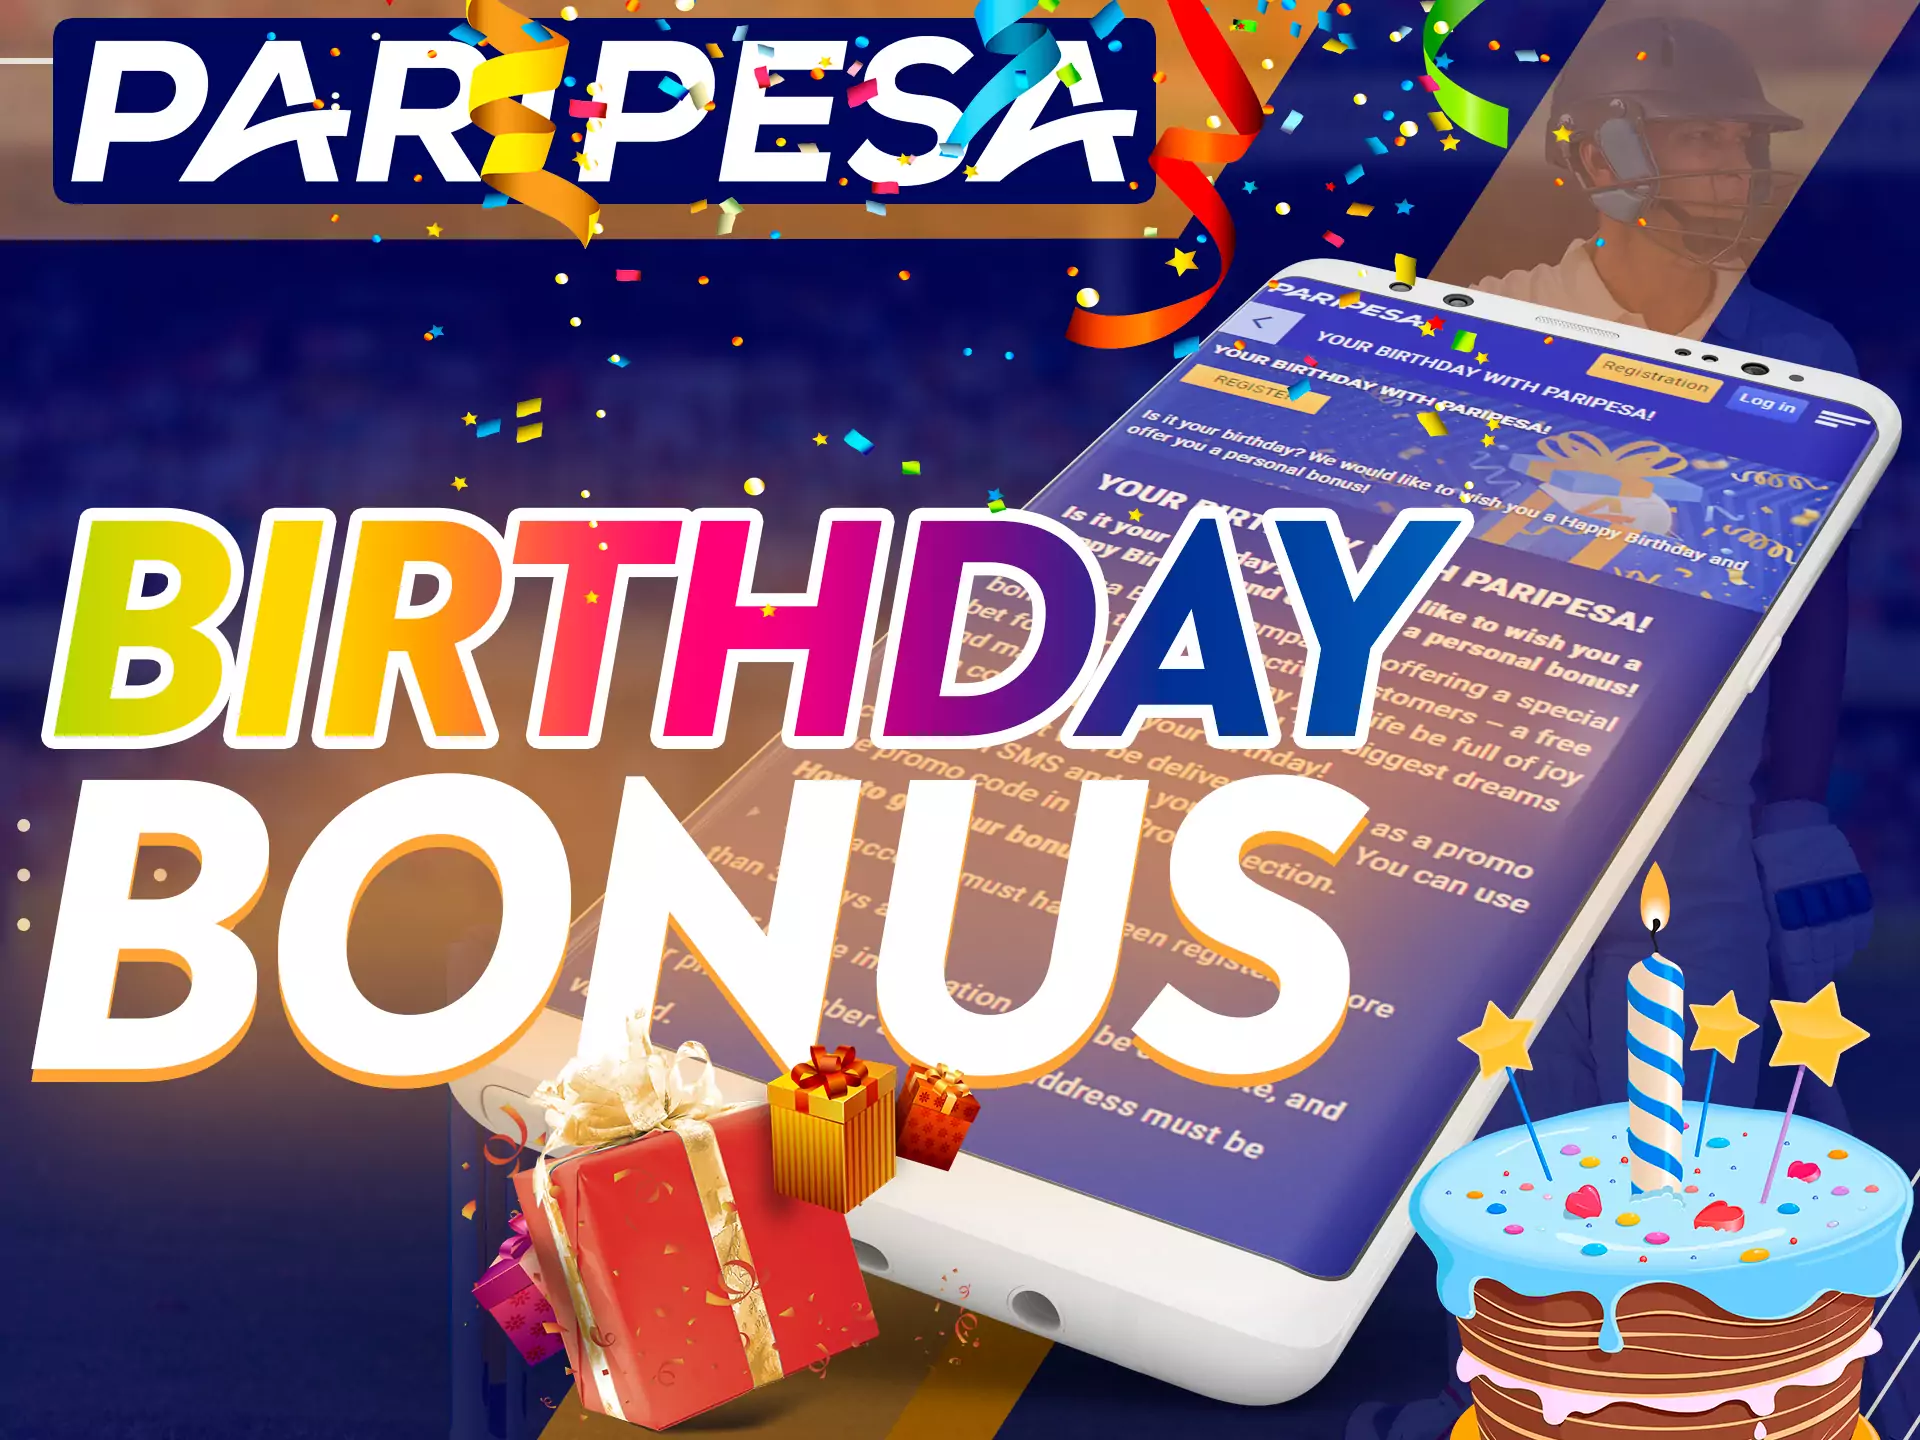 If it's your birthday, you can count on the Paripesa app for a bonus.